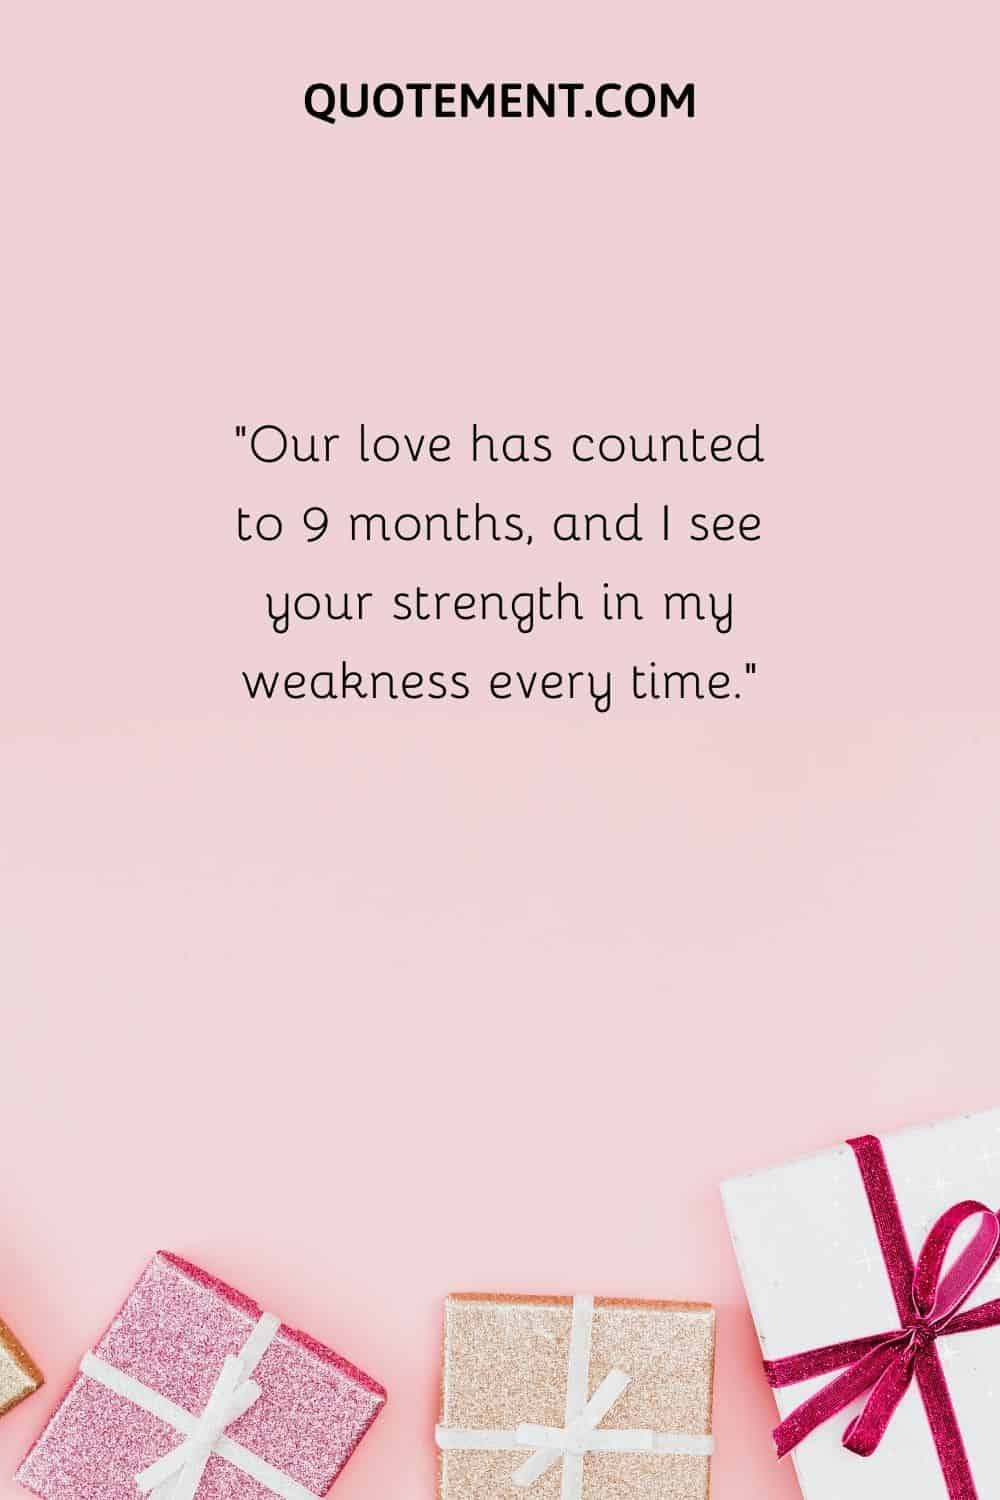 Our love has counted to 9 months, and I see your strength in my weakness every time.”